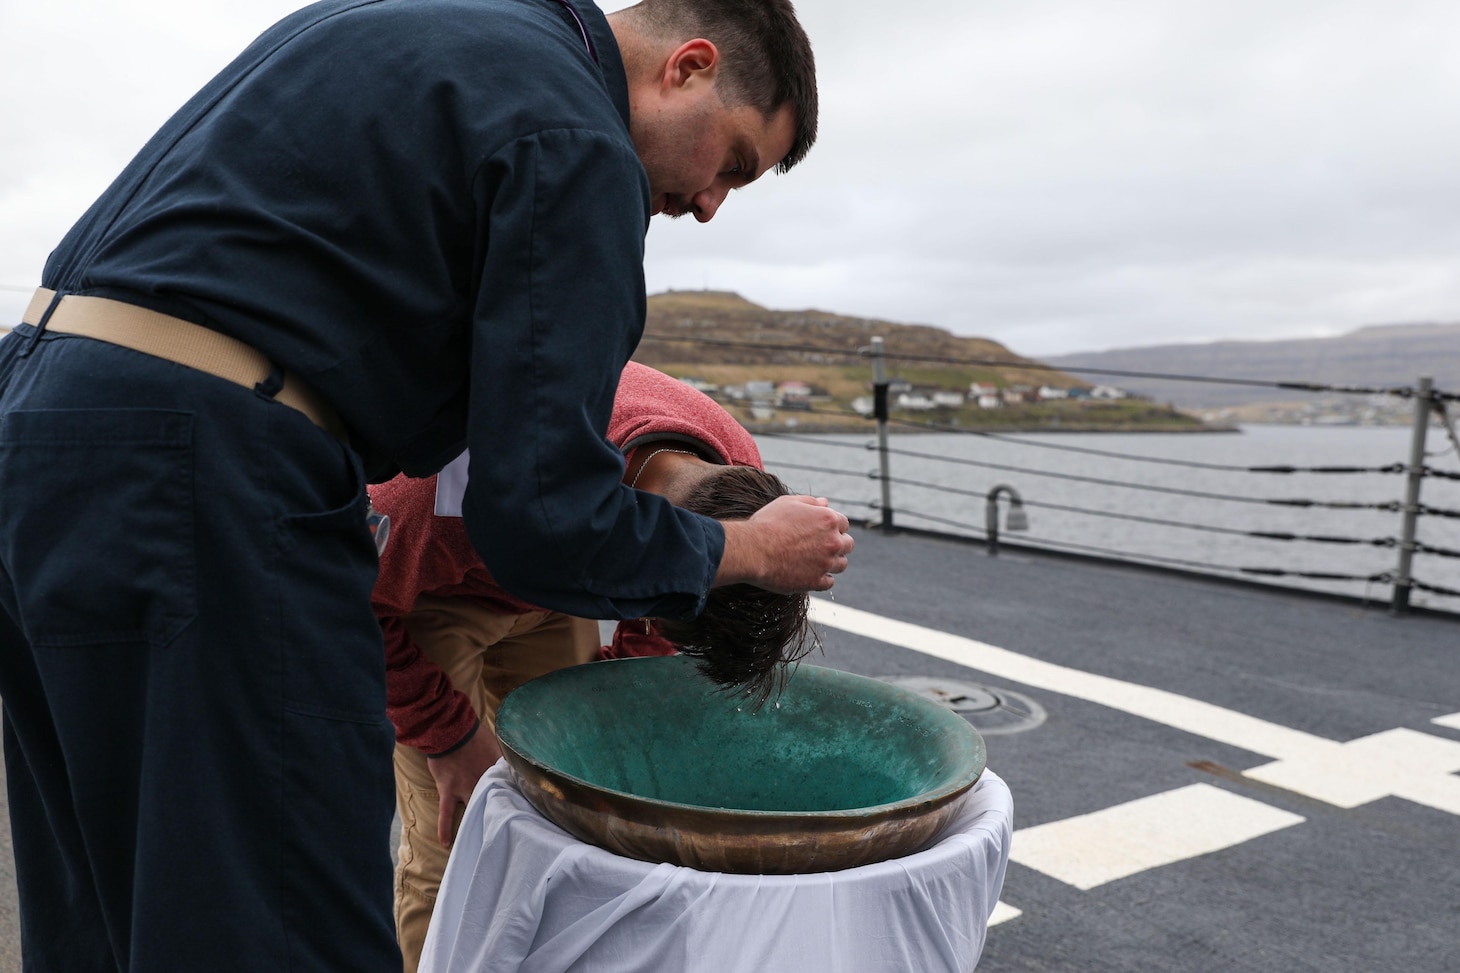 Hospital Corpsman 3rd Class Jonathan Scripp, right, is baptised by Lt. Joshua Johnson, the Chaplain aboard the Arleigh Burke-class guided-missile destroyer USS Ross (DDG 71), in a reaffirmation of baptism ceremony using the ship’s bell while in port in the Faroe Islands, May 15, 2021.